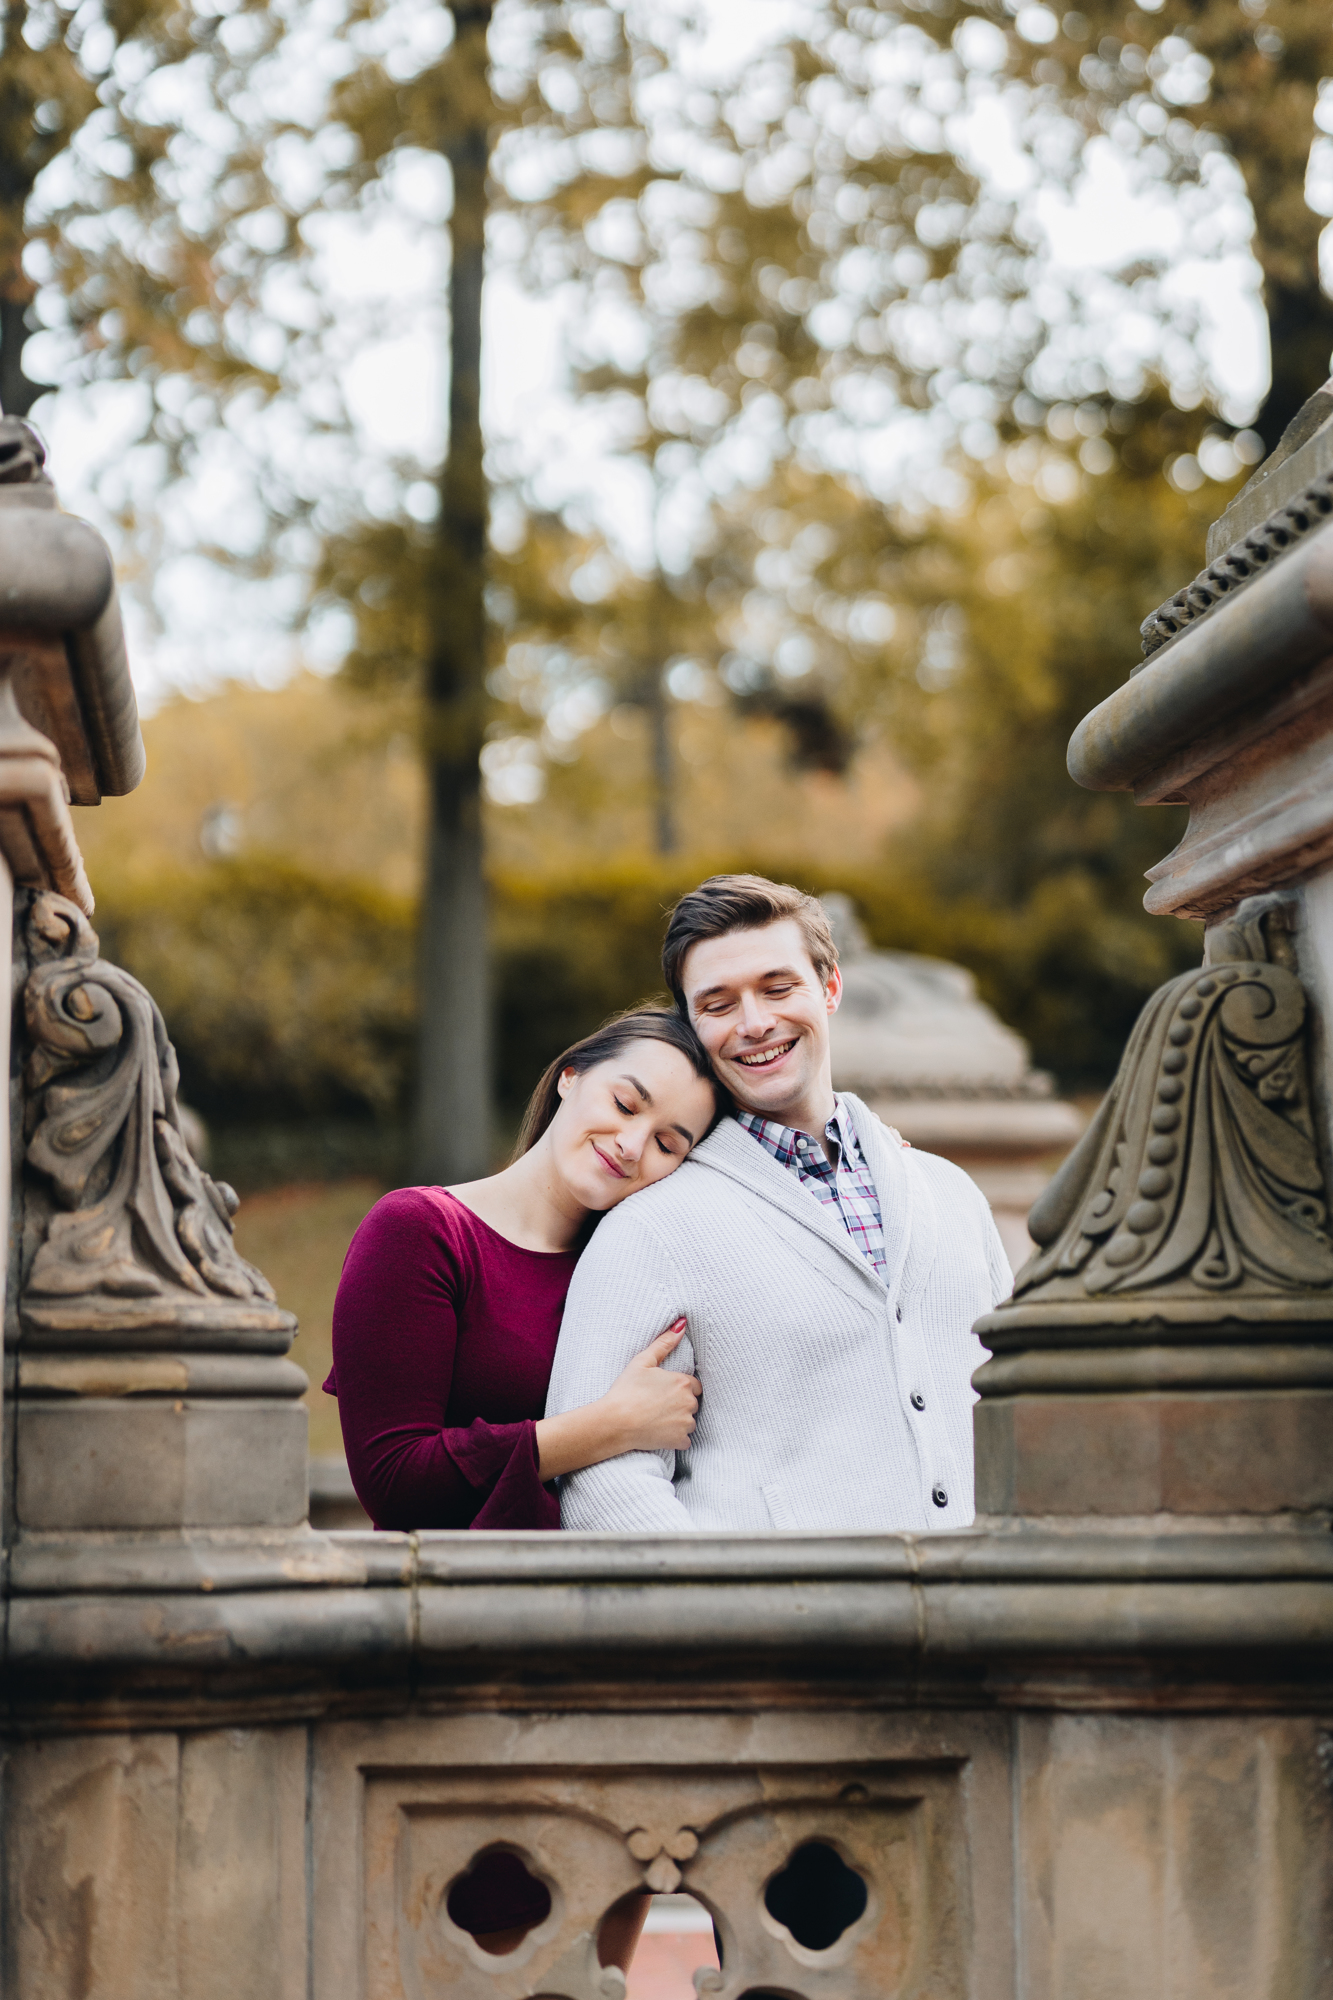 Special Fall Engagement Photos in Central Park New York